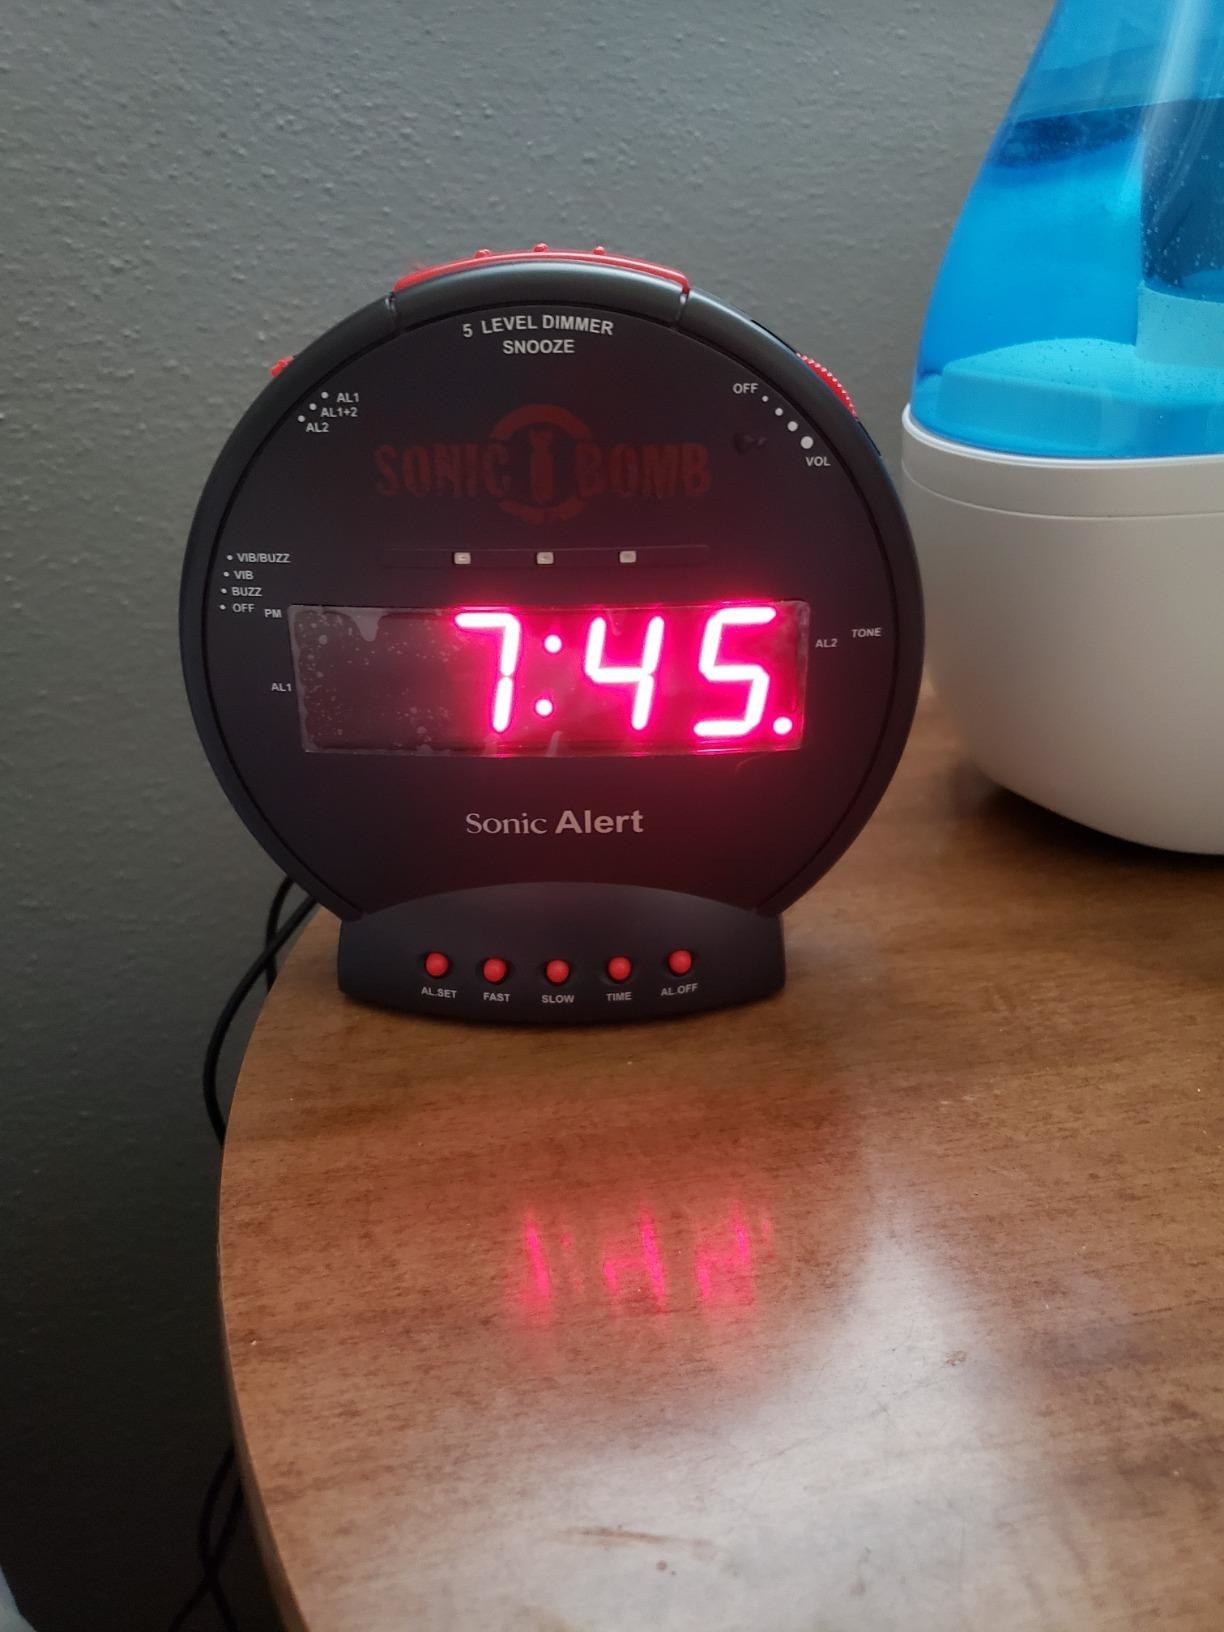 The clock with digital time reading